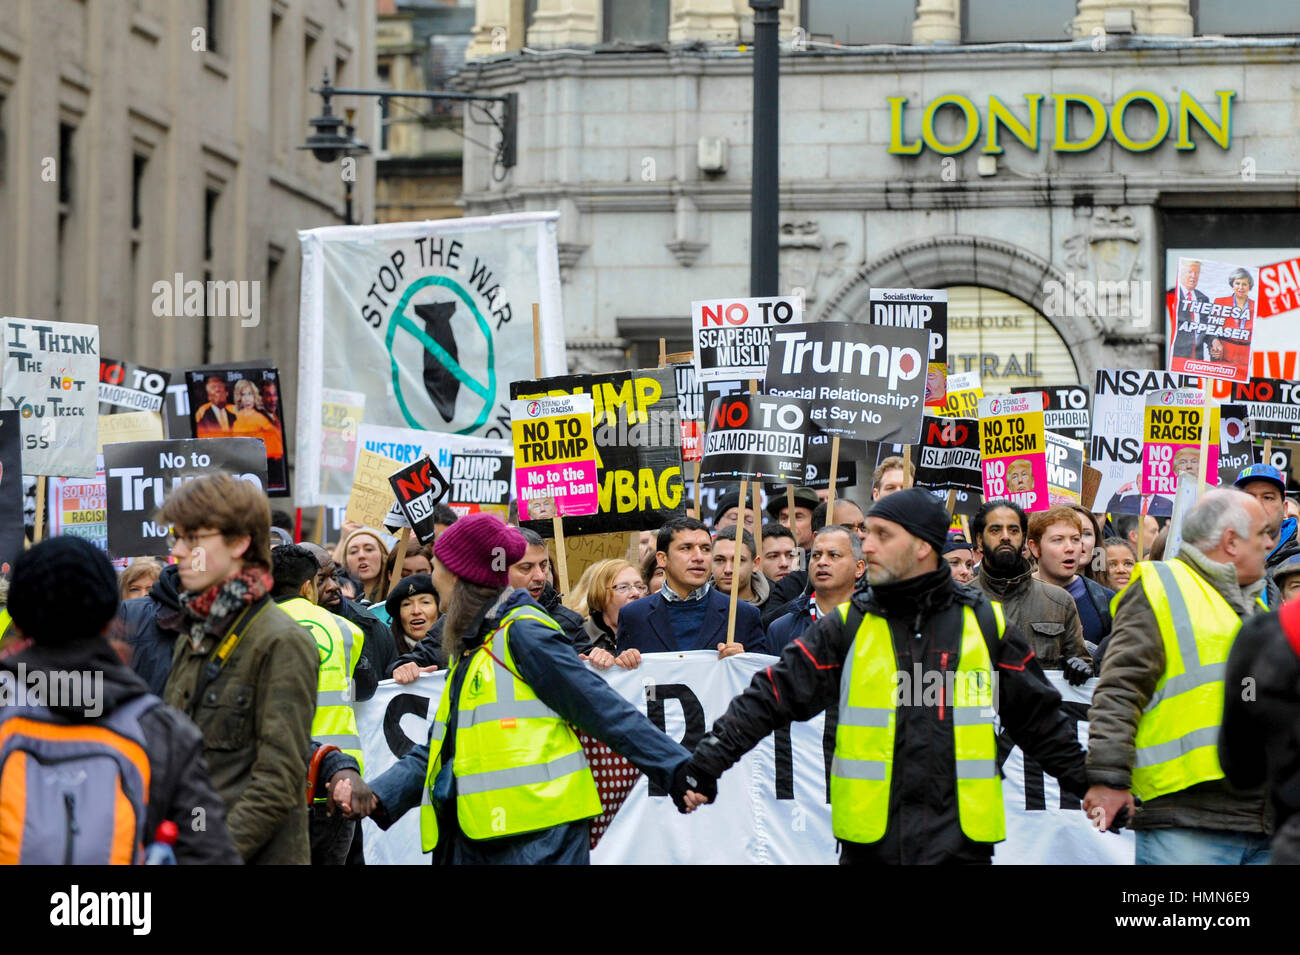 London, UK.  4 February 2017.  Thousands of people, standing against racism and Islamophobia, are seen on Haymarket, marching from the U.S. Embassy to Whitehall to oppose the travel ban on Muslims, from seven countries, imposed by Donald Trump, U.S. President.  © Stephen Chung / Alamy Live News Stock Photo